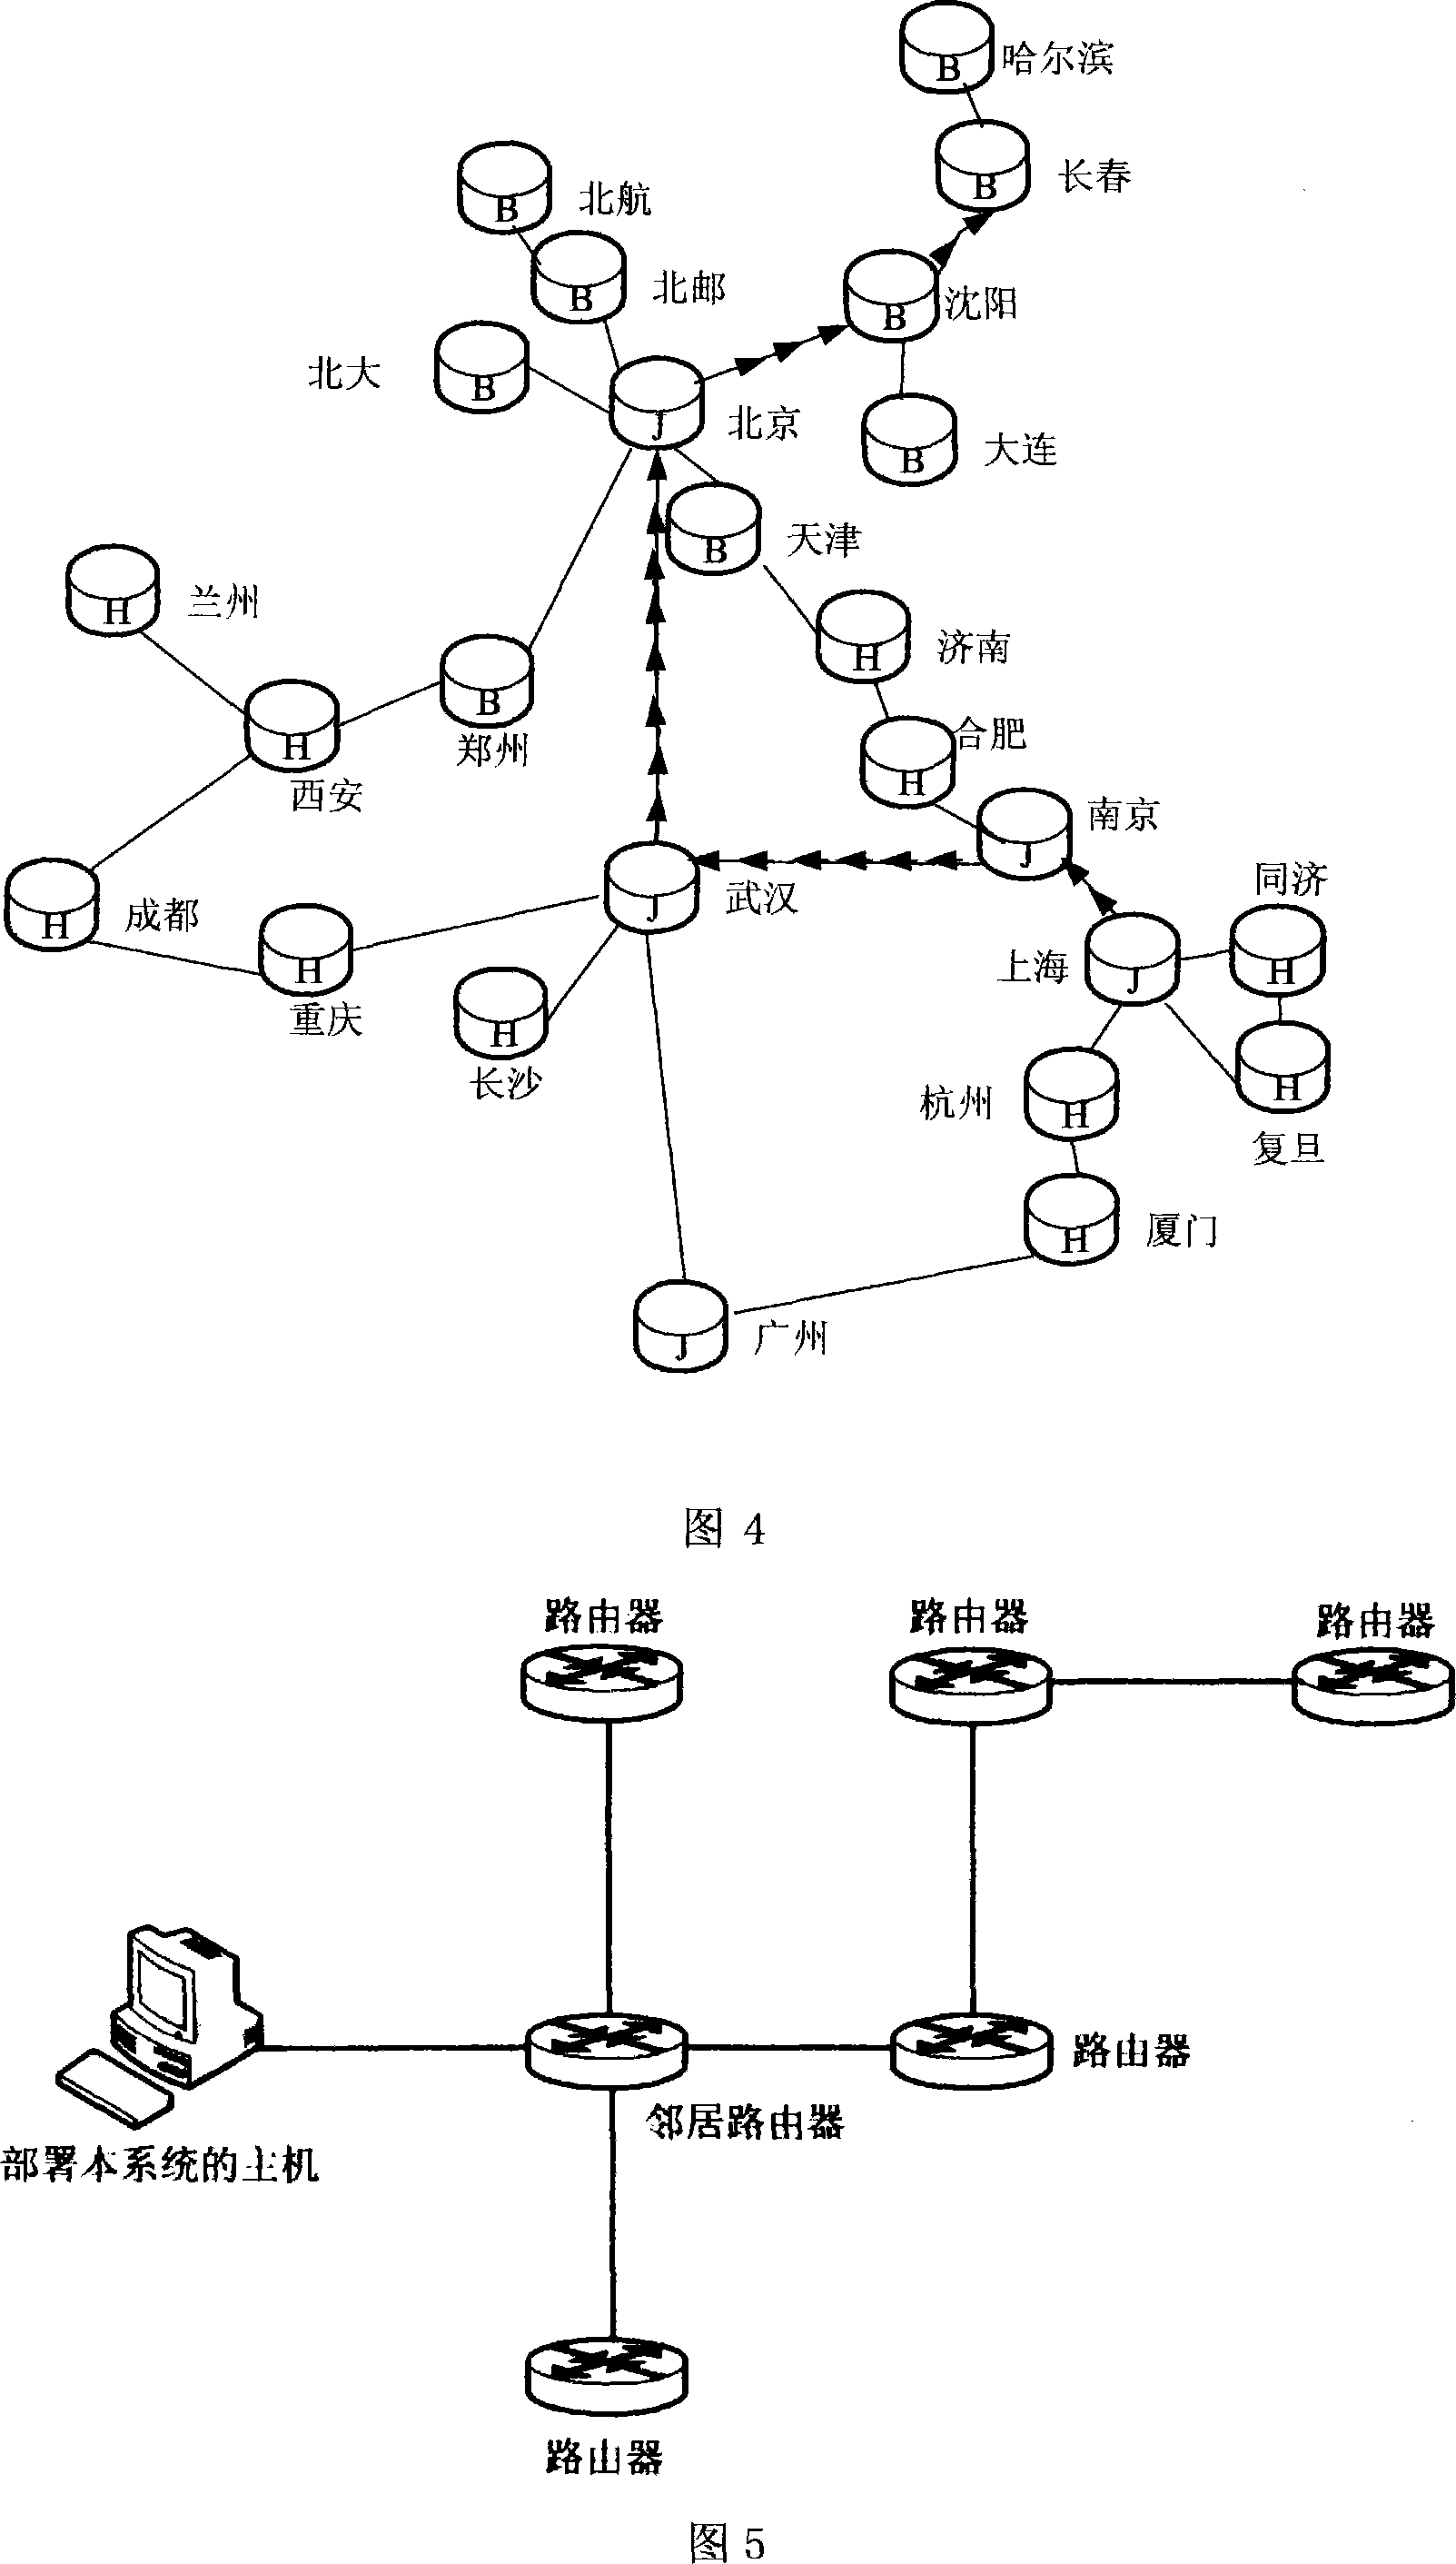 A routing path display method